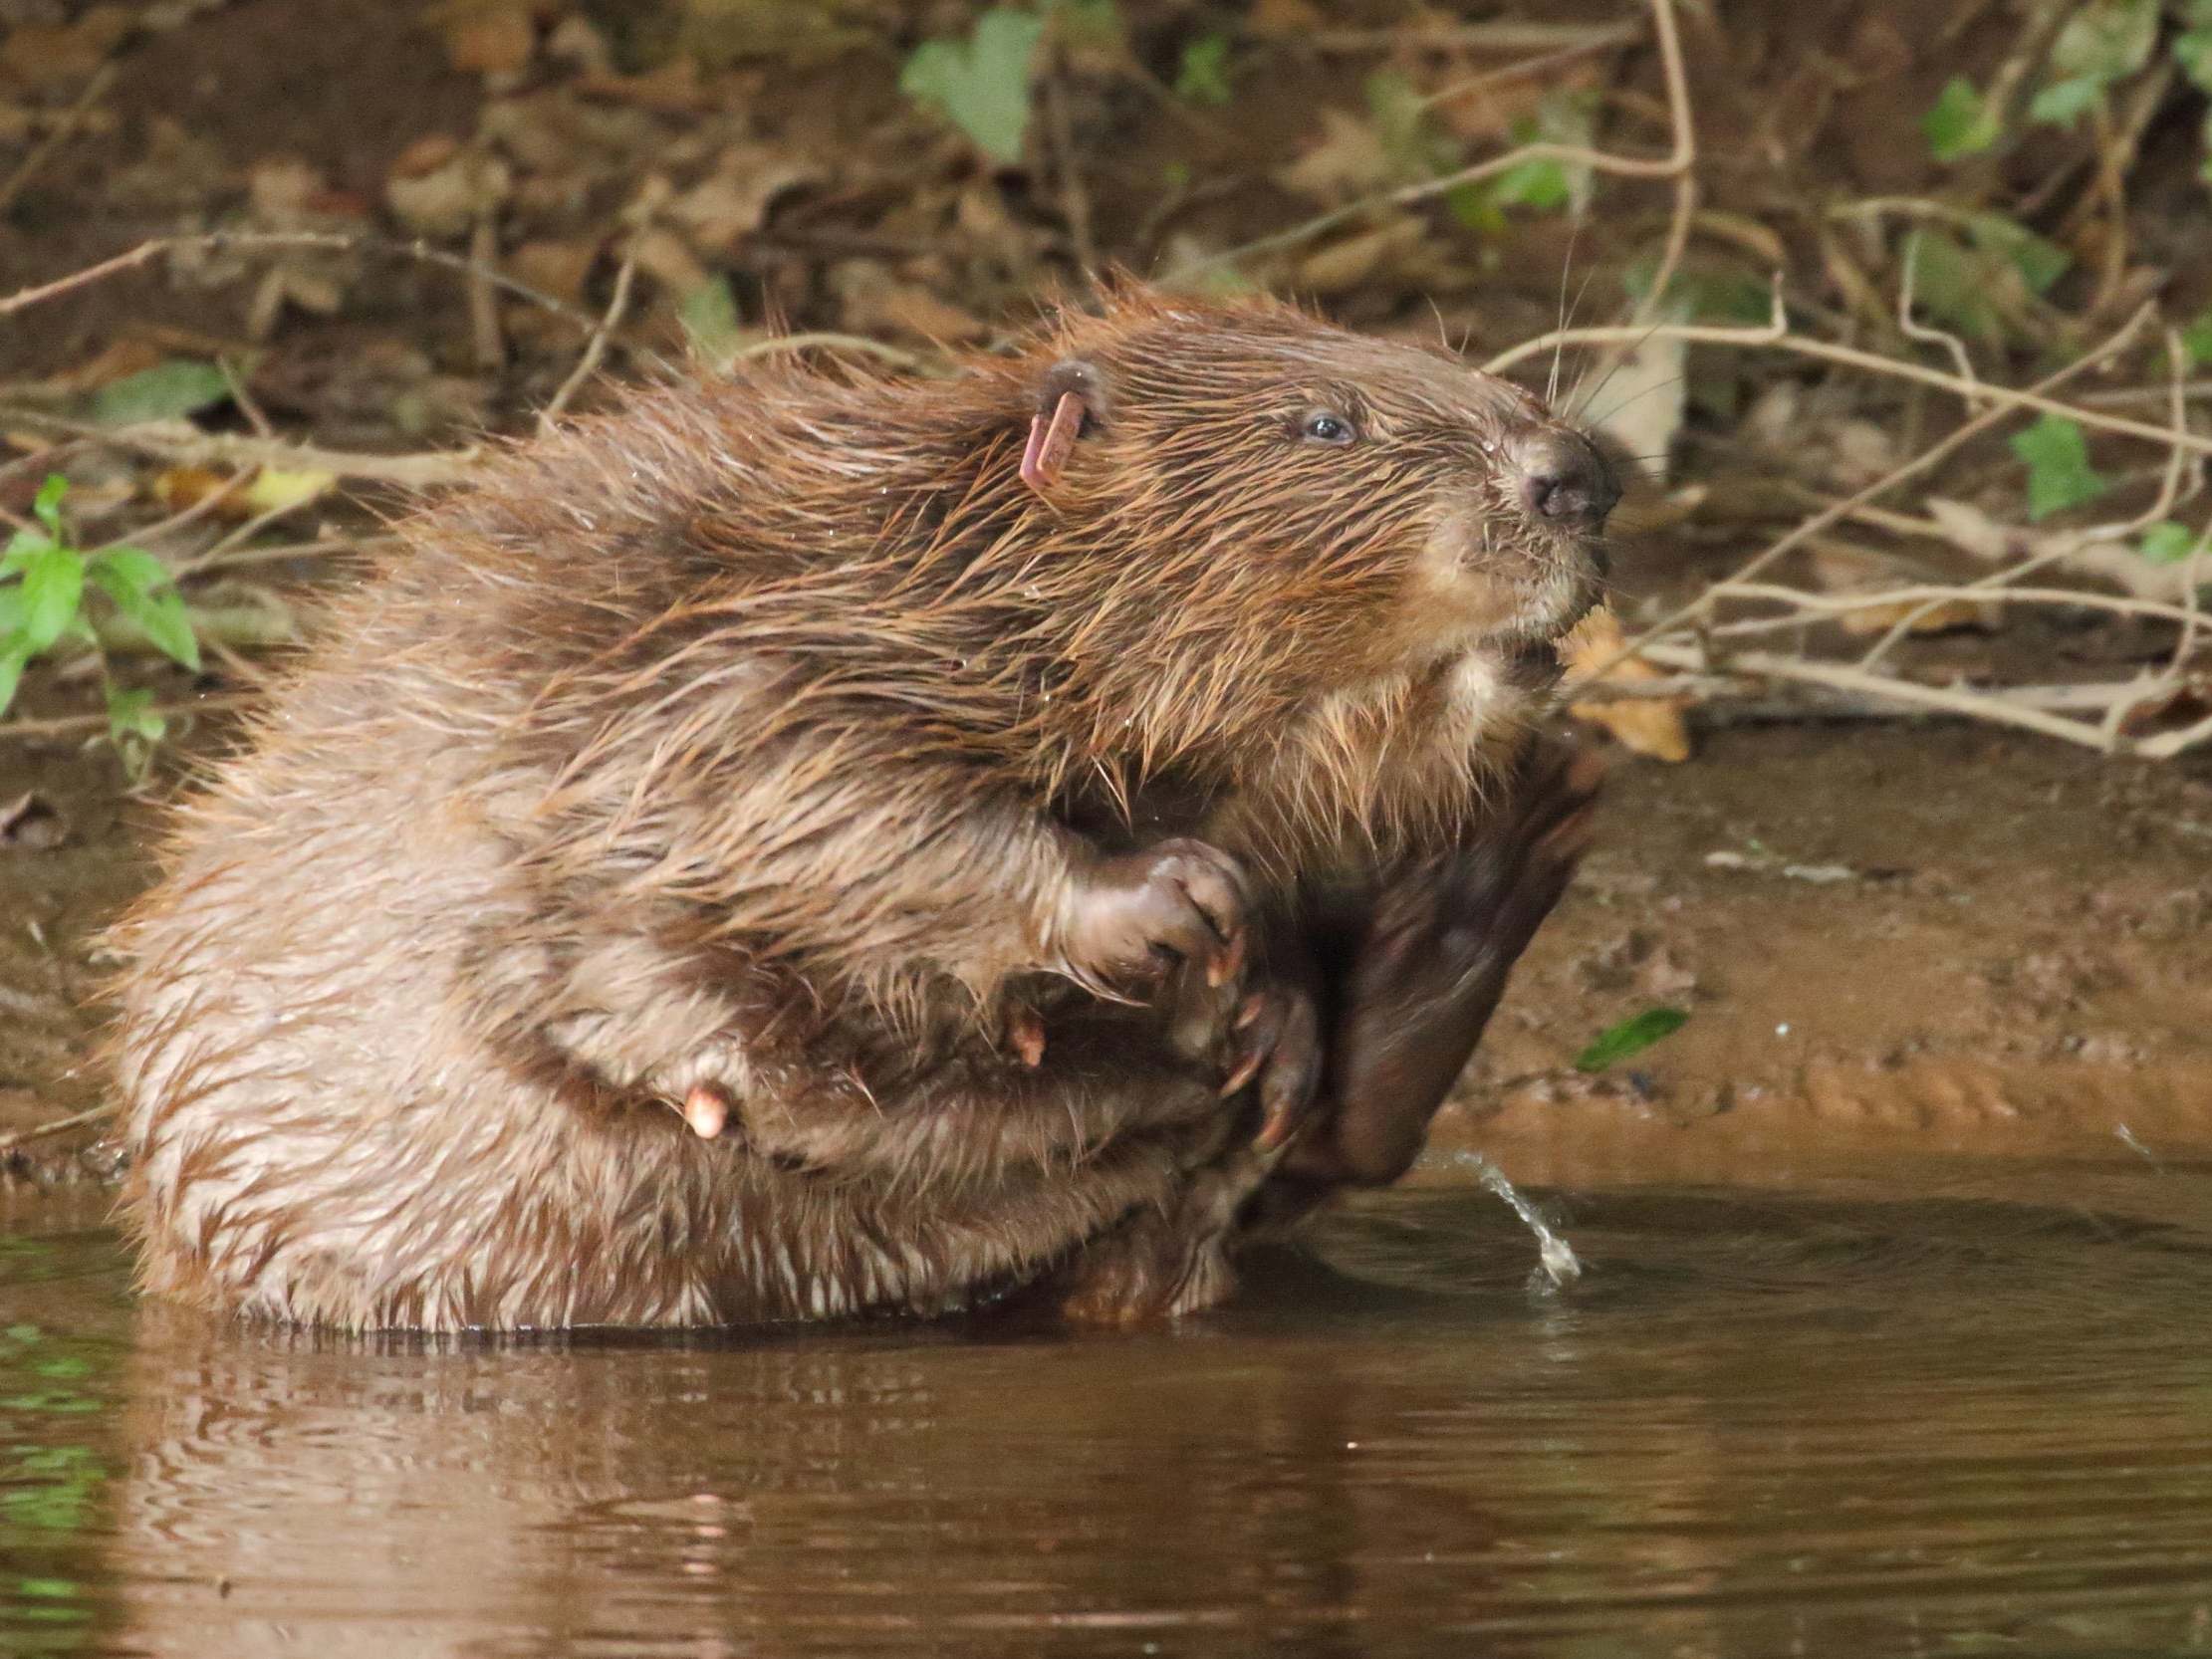 The mammals have drawn tourists to the River Otter in Devon